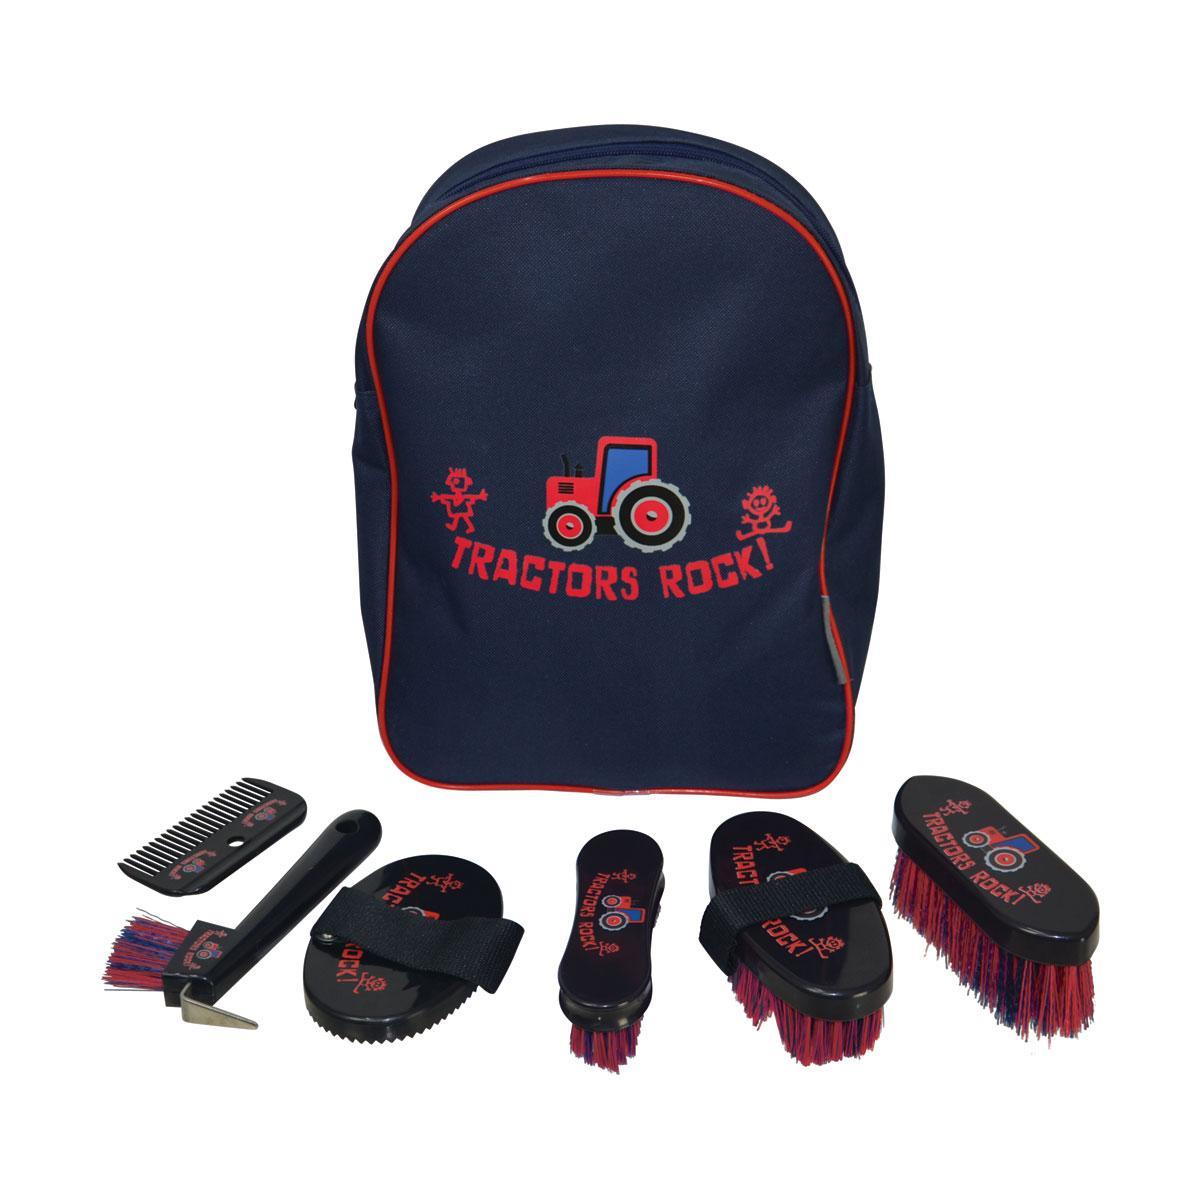 HySHINE Tractors Rock Horse Grooming Set (Navy/Red) (One Size)